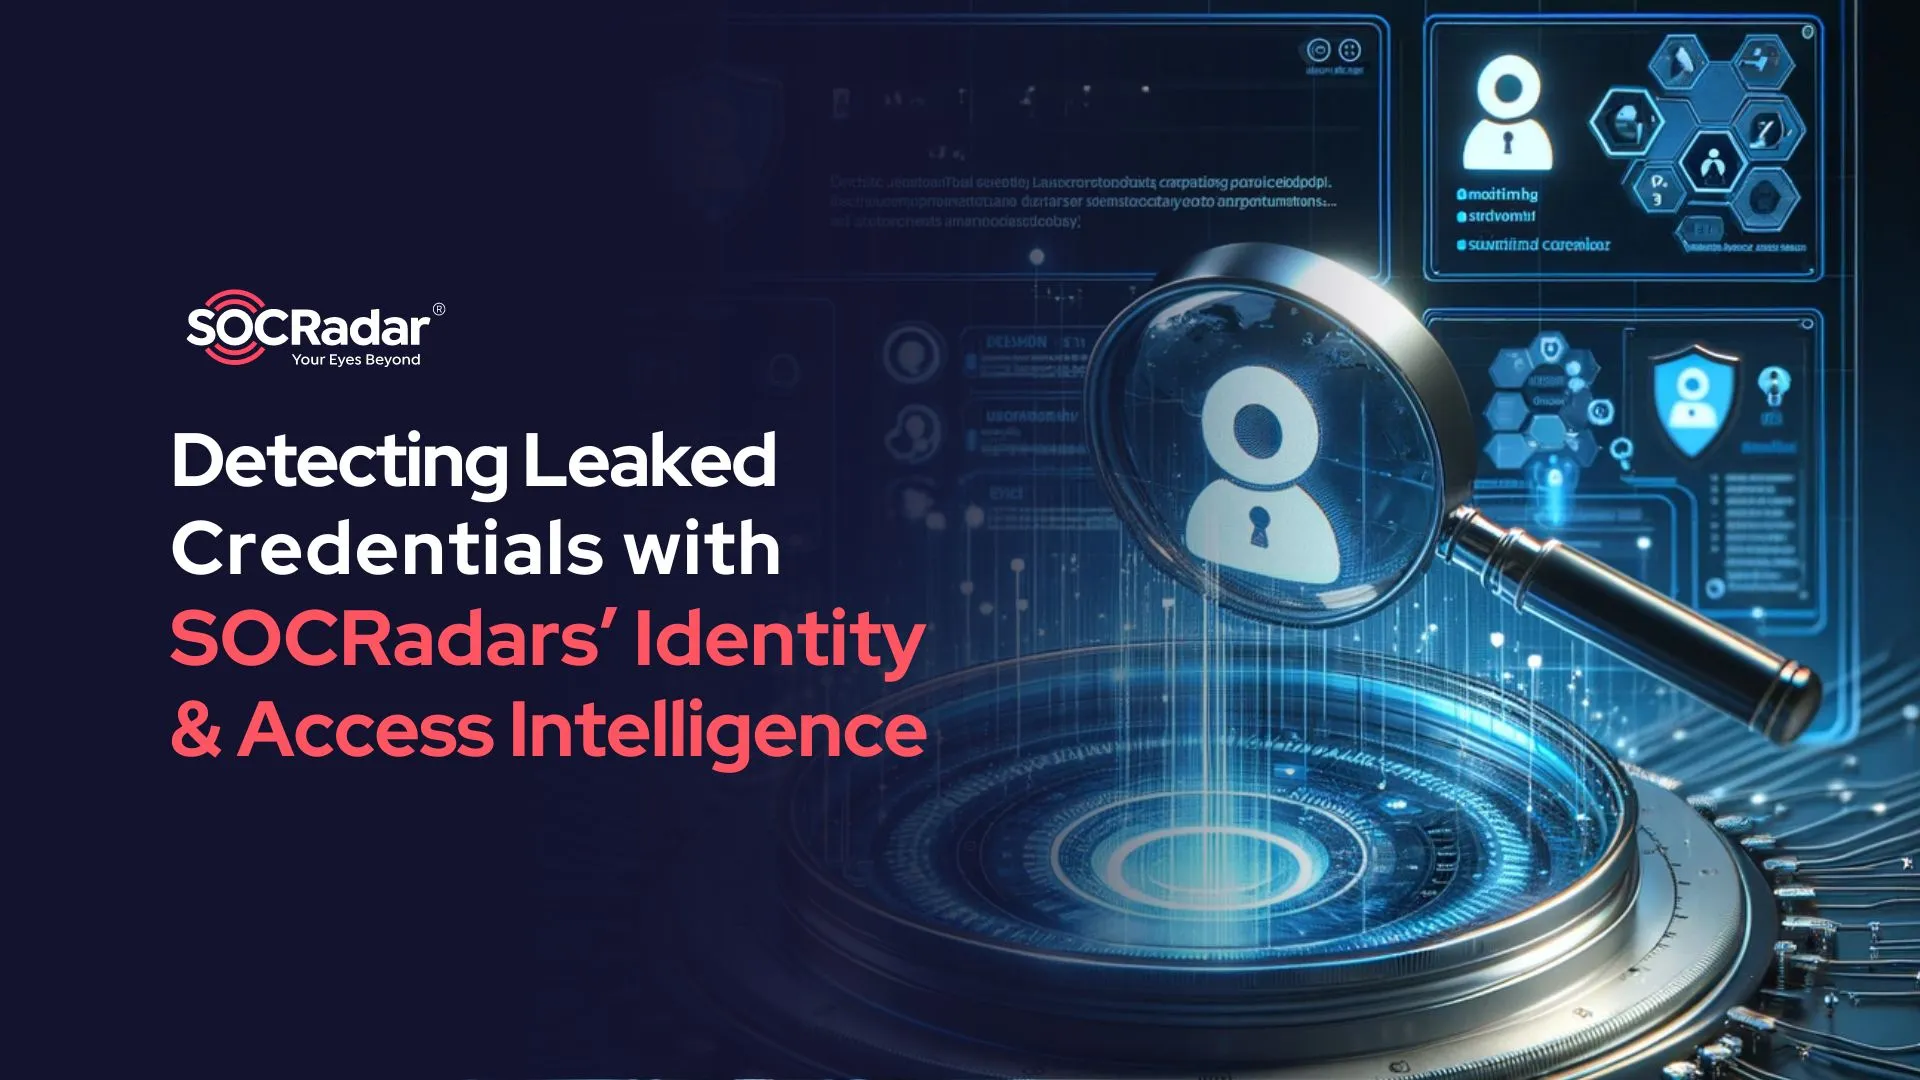 SOCRadar® Cyber Intelligence Inc. | Detecting Leaked Credentials with Identity & Access Intelligence